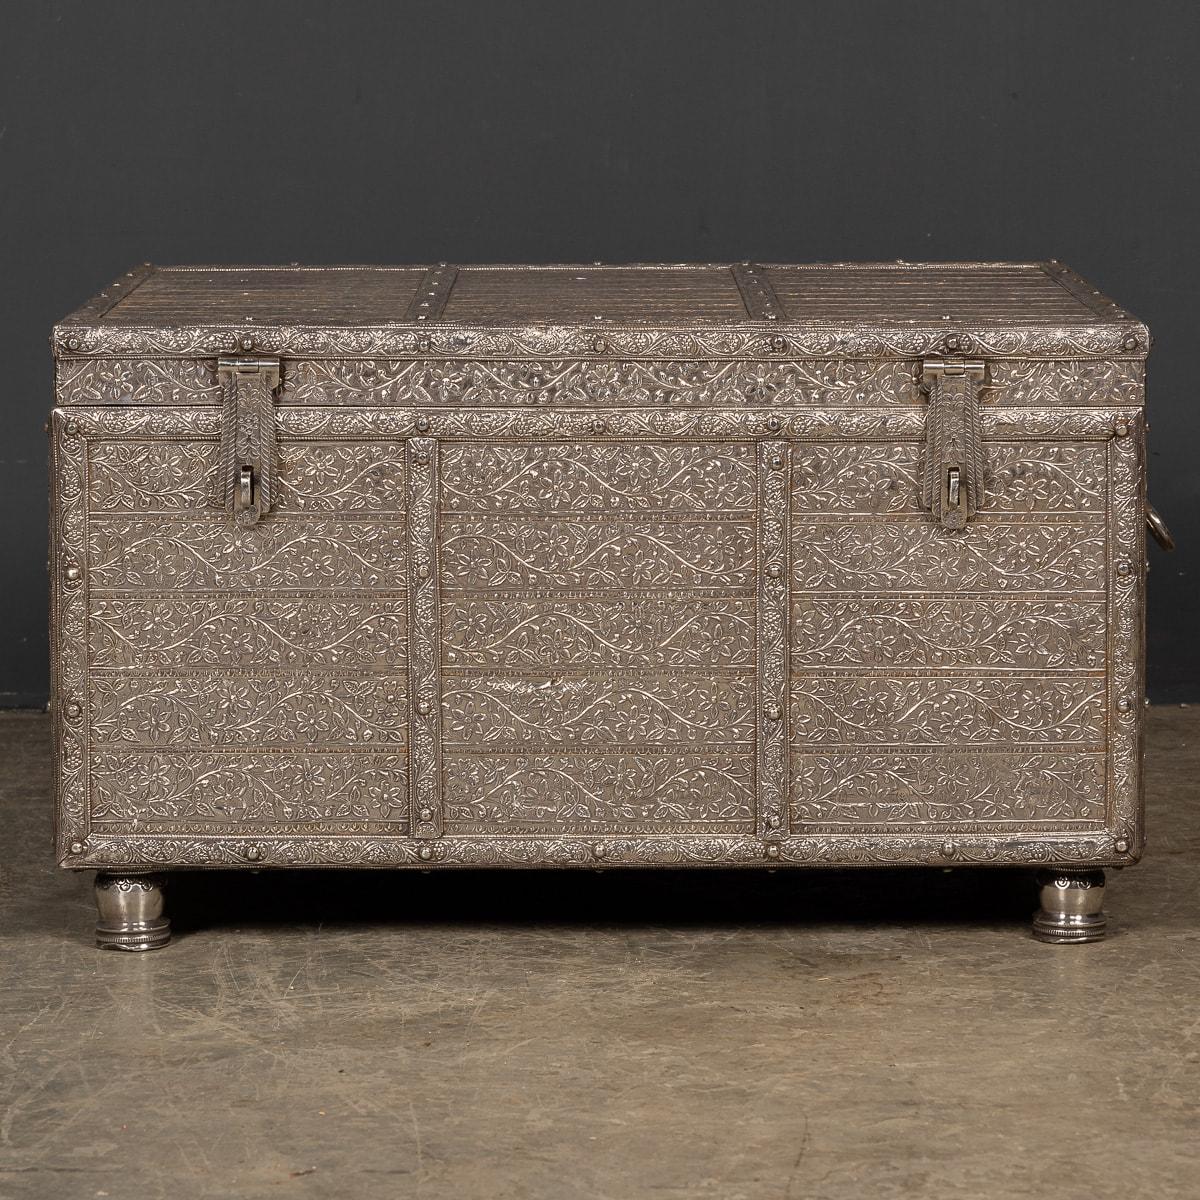 20th Century Rare Indian Solid Silver Massive Treasure Chest / Casket, c.1900 In Good Condition For Sale In Royal Tunbridge Wells, Kent